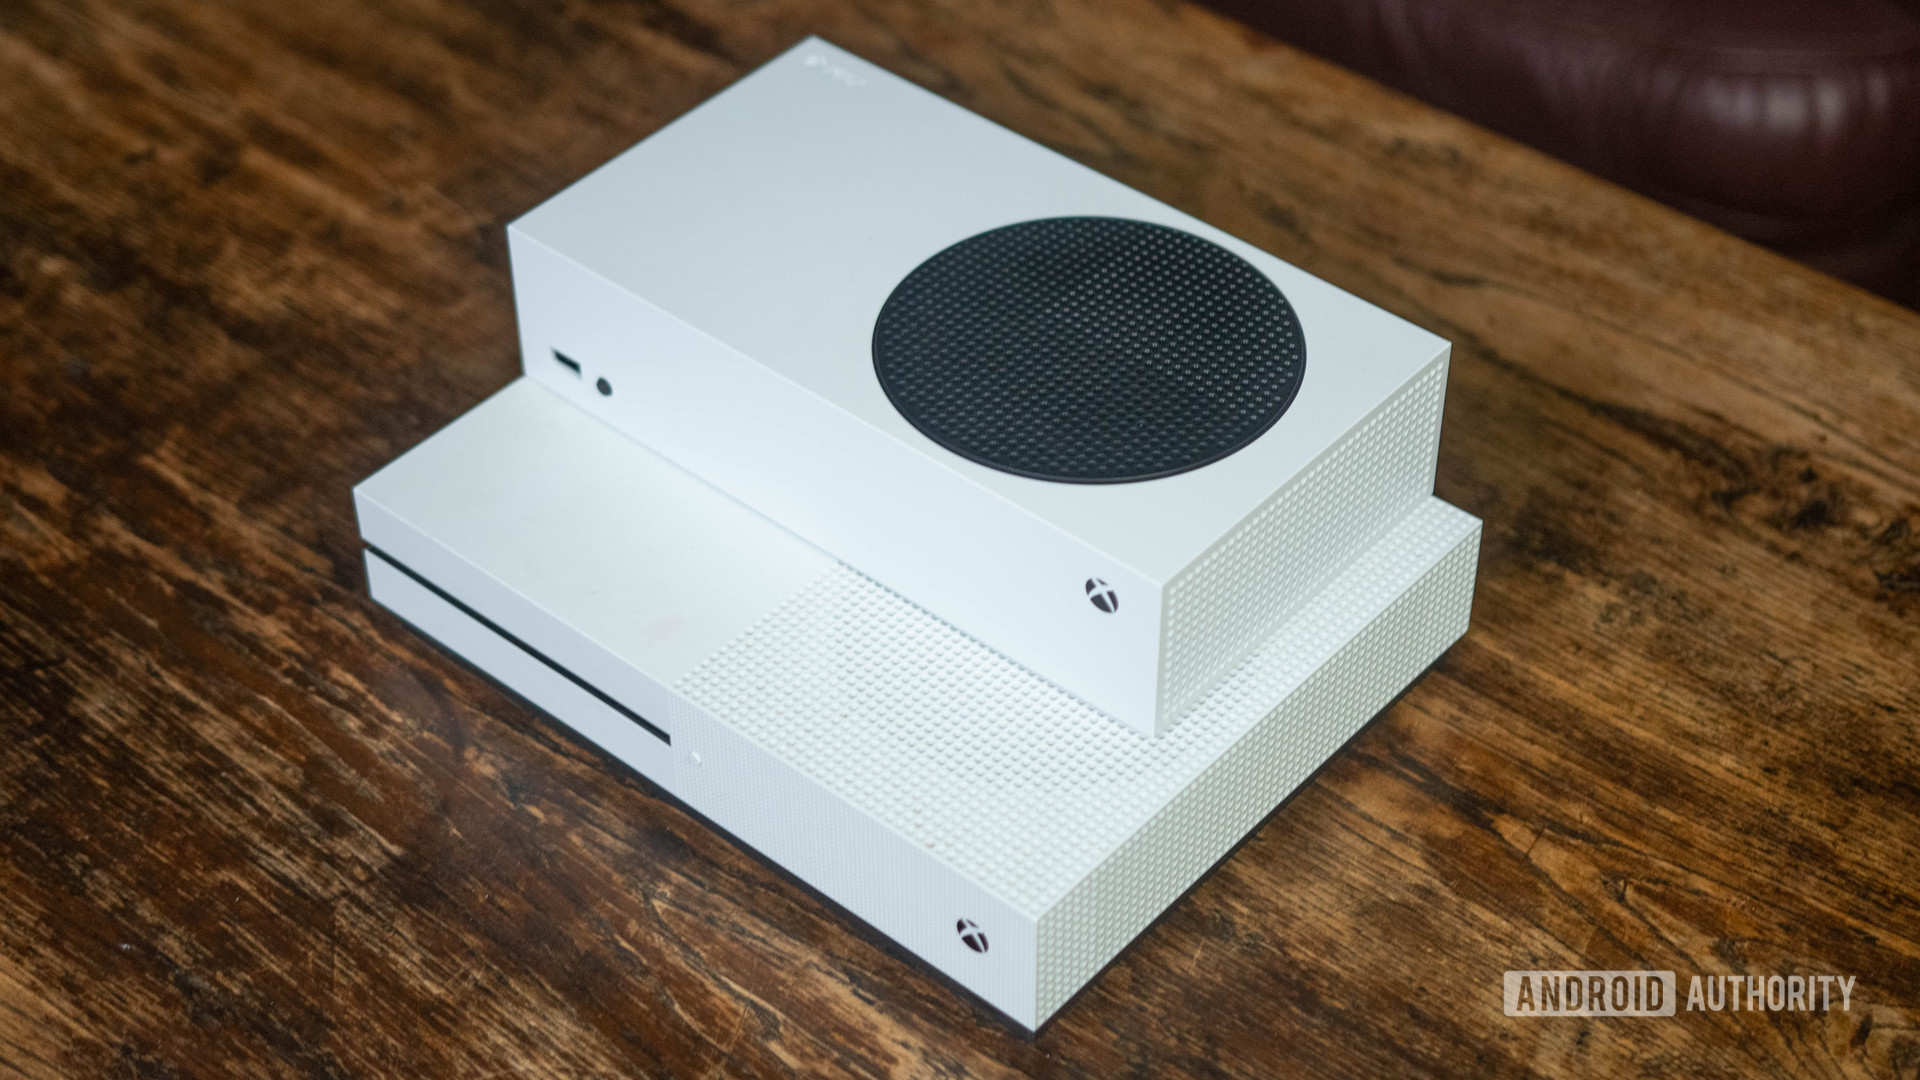 Should You Upgrade to the Xbox Series S From the Xbox One X?